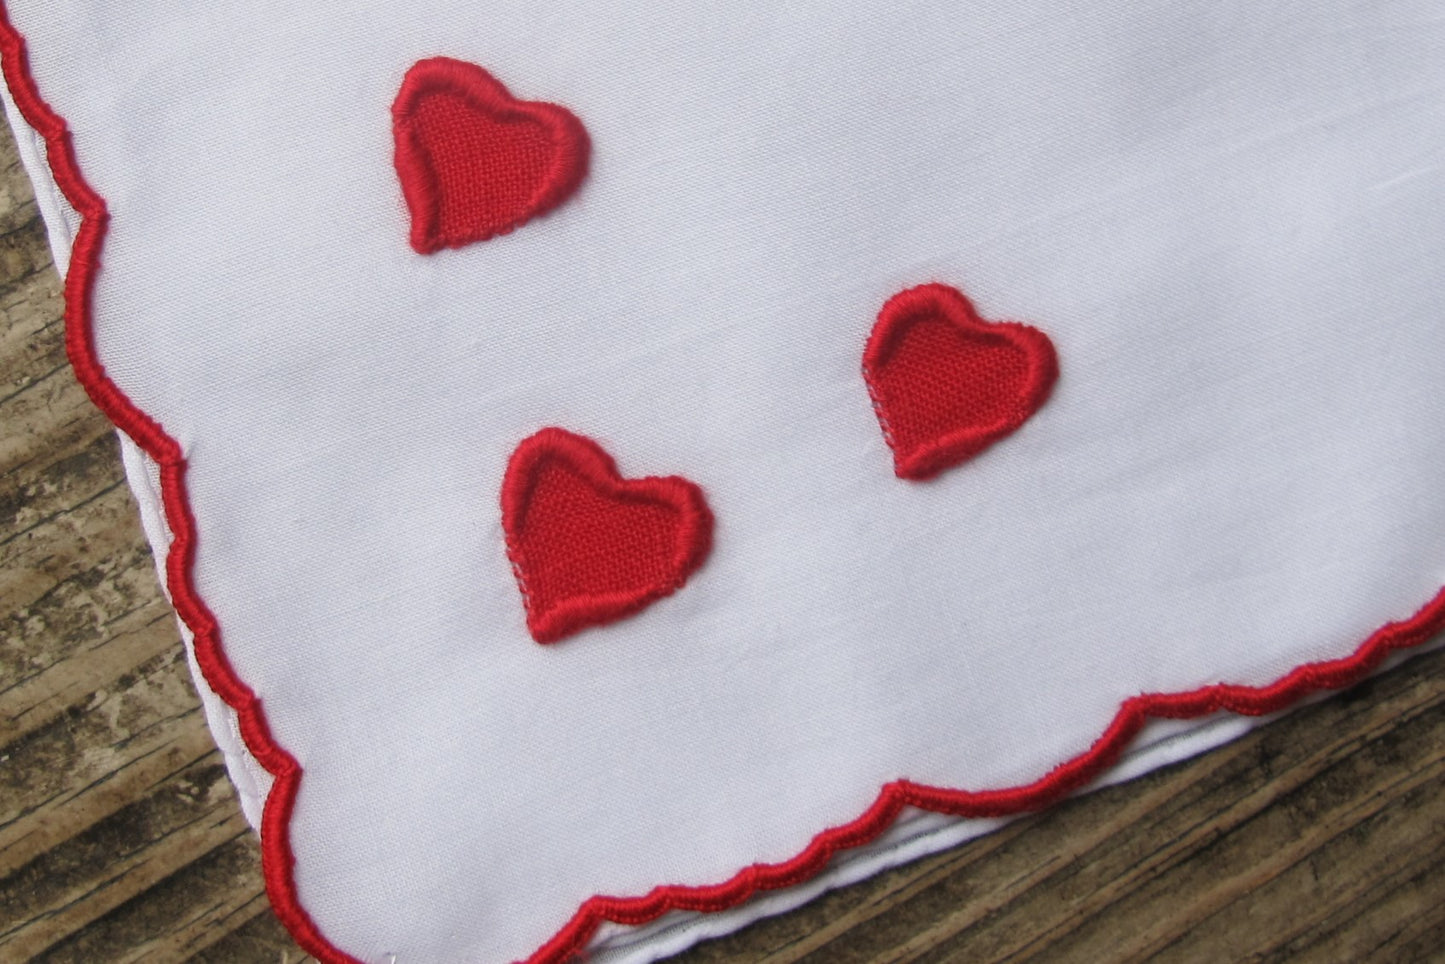 Handkerchief Ladies - Madeira Embroidered Red Hearts